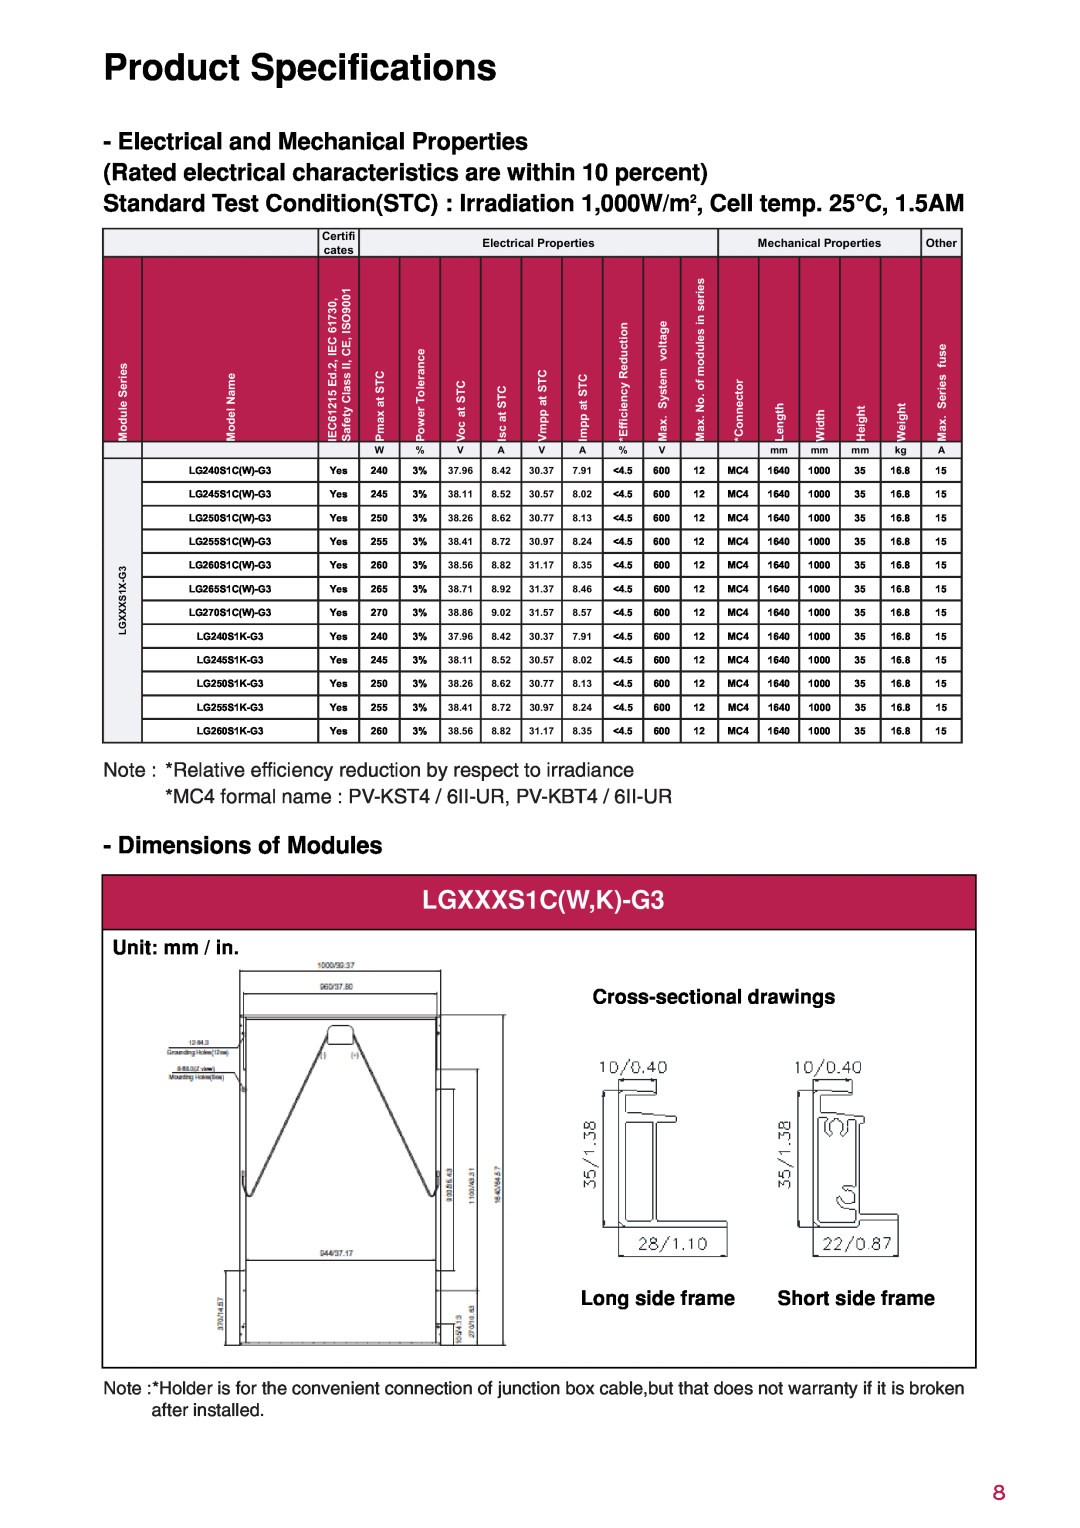 LG Electronics LGXXXS1C(W Product Specifications, Electrical and Mechanical Properties, Dimensions of Modules, Other 